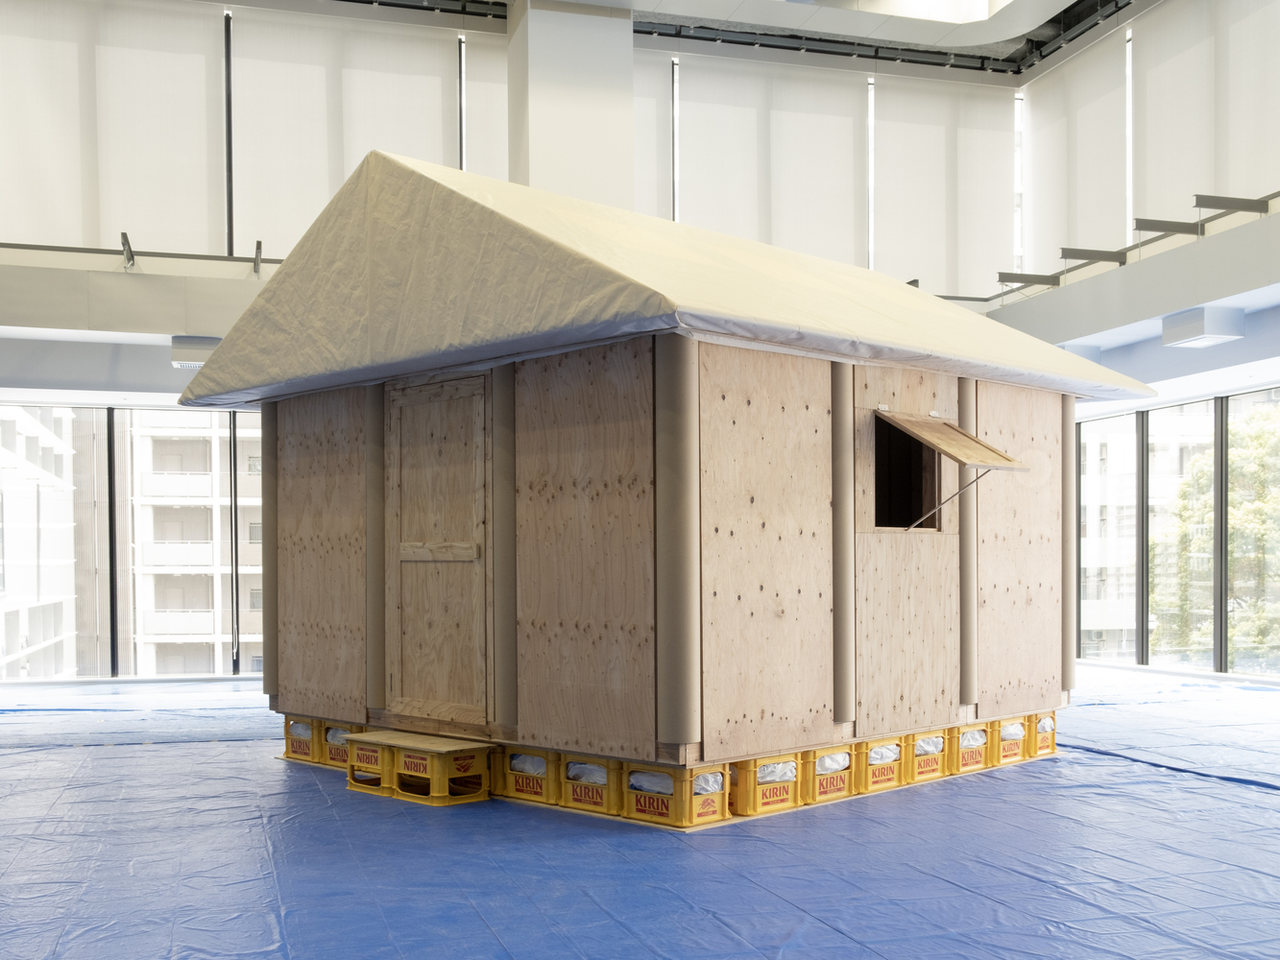 shigeru ban unveils updated prototype for temporary housing in response to the turkey syria earthquake Easy Resize com